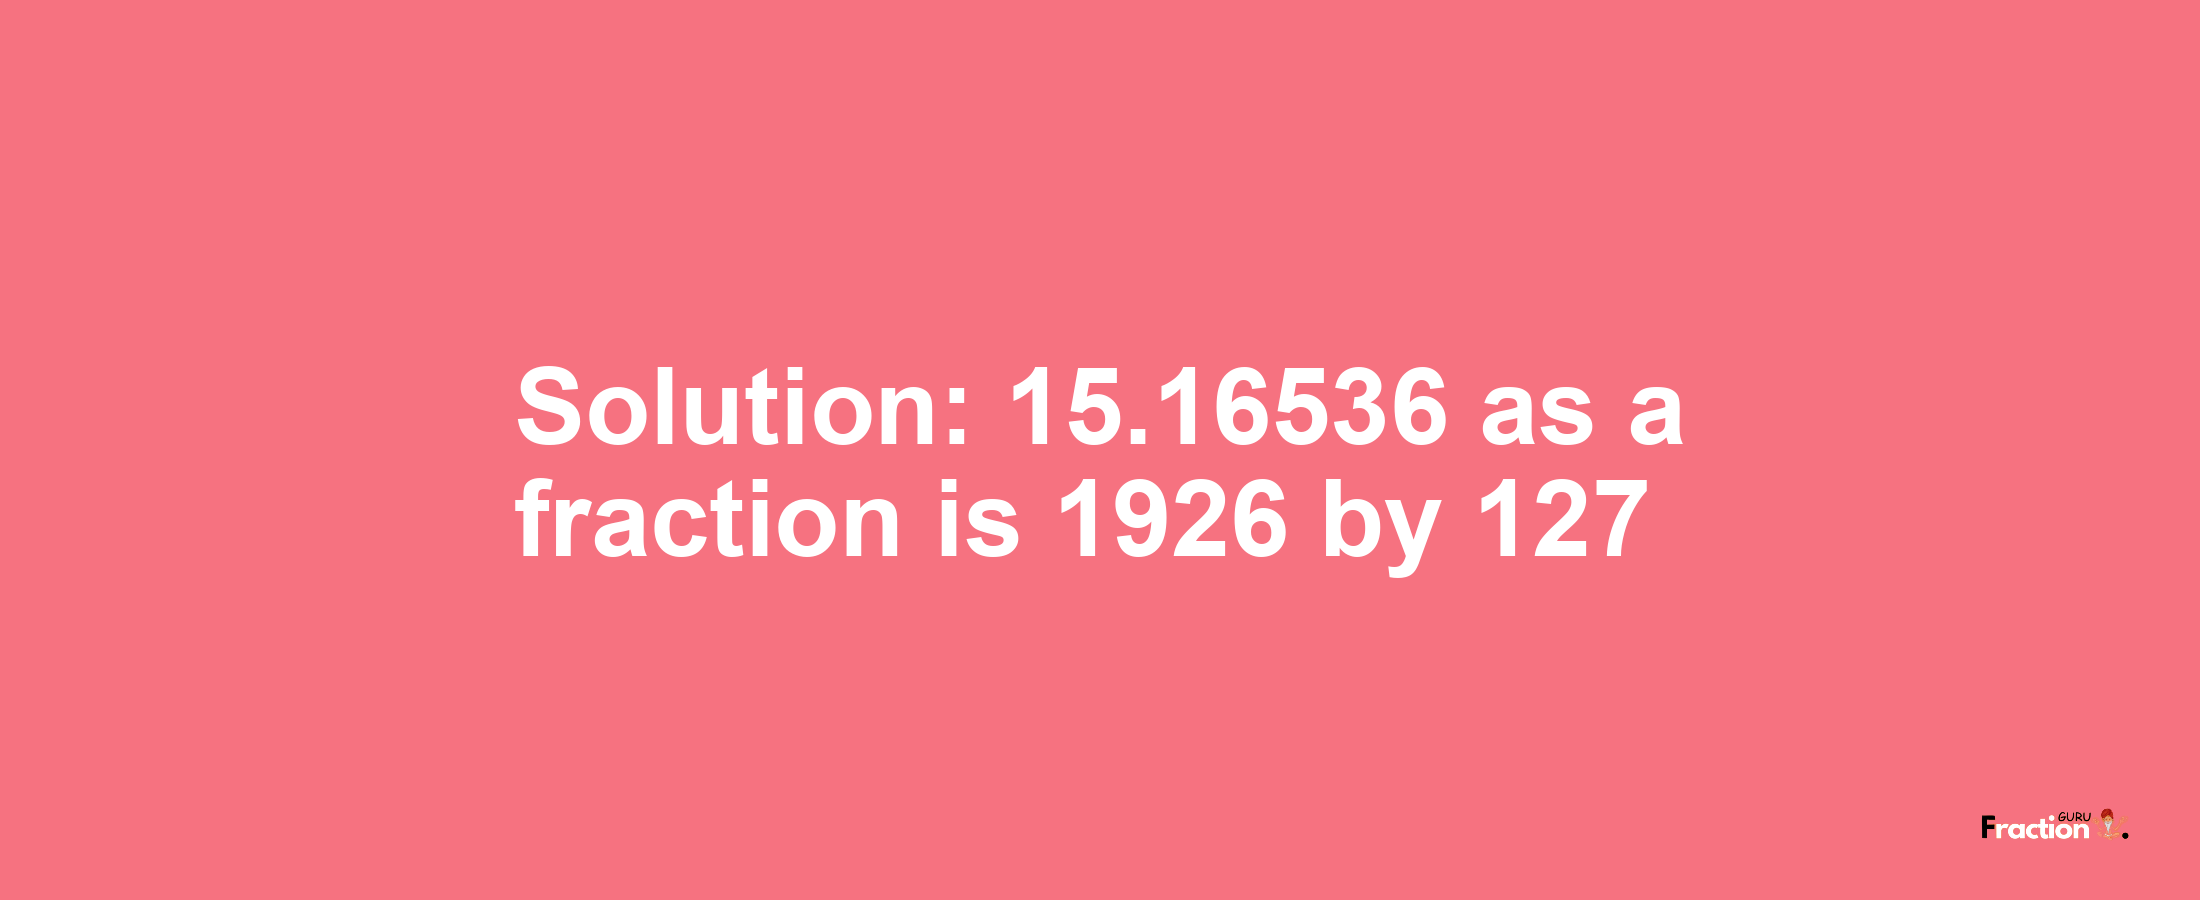 Solution:15.16536 as a fraction is 1926/127